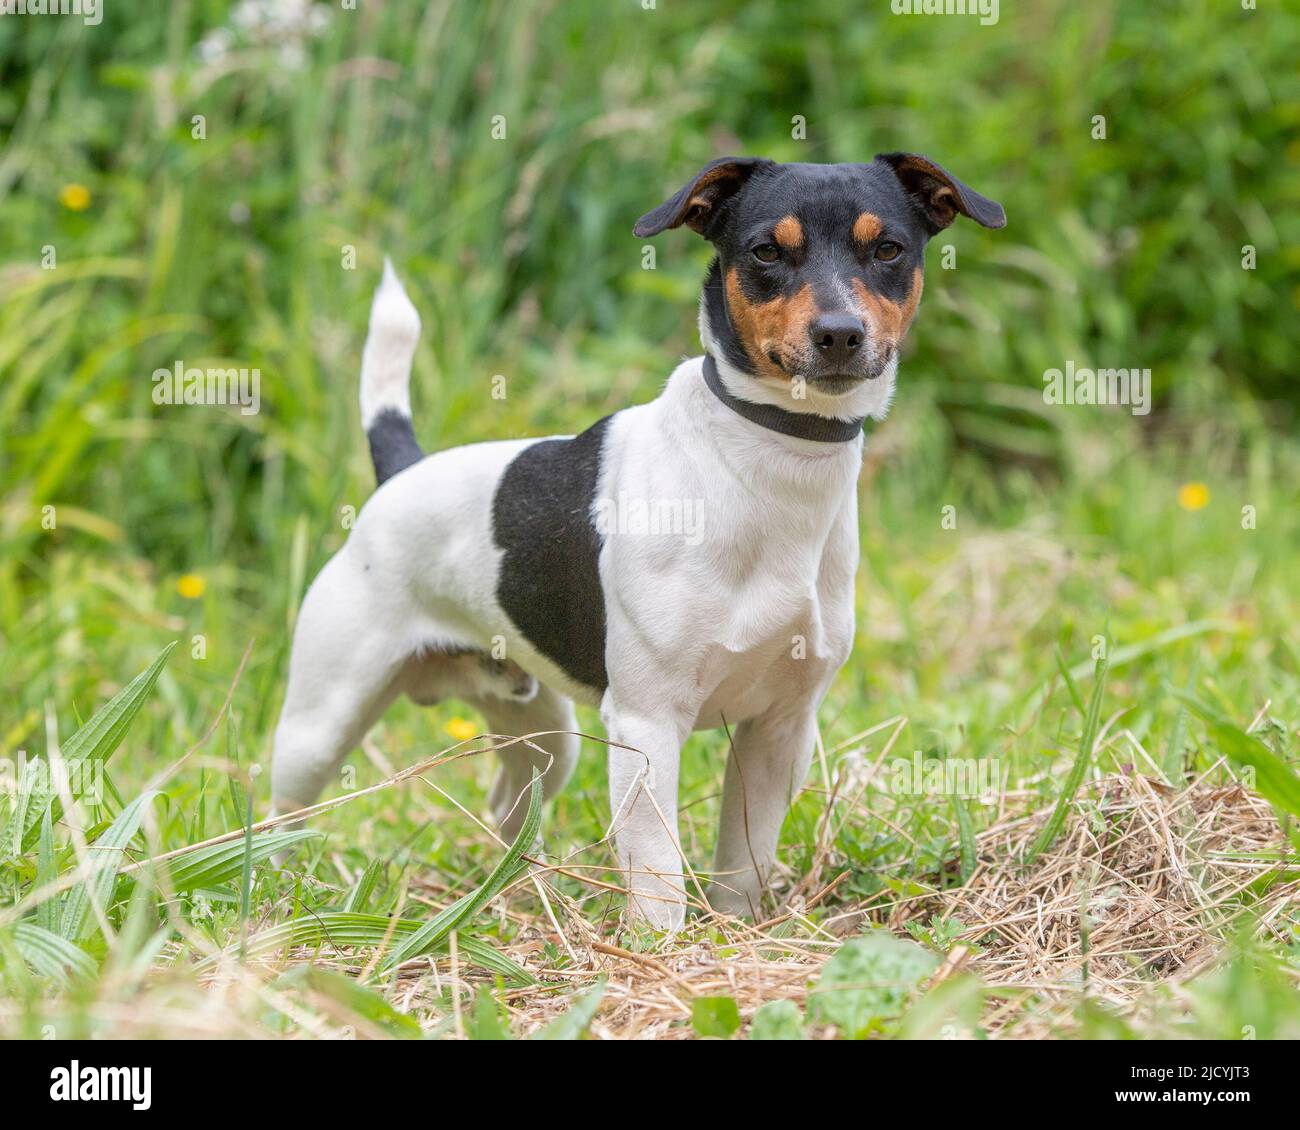 Jack Russell Terrier dog Stock Photo